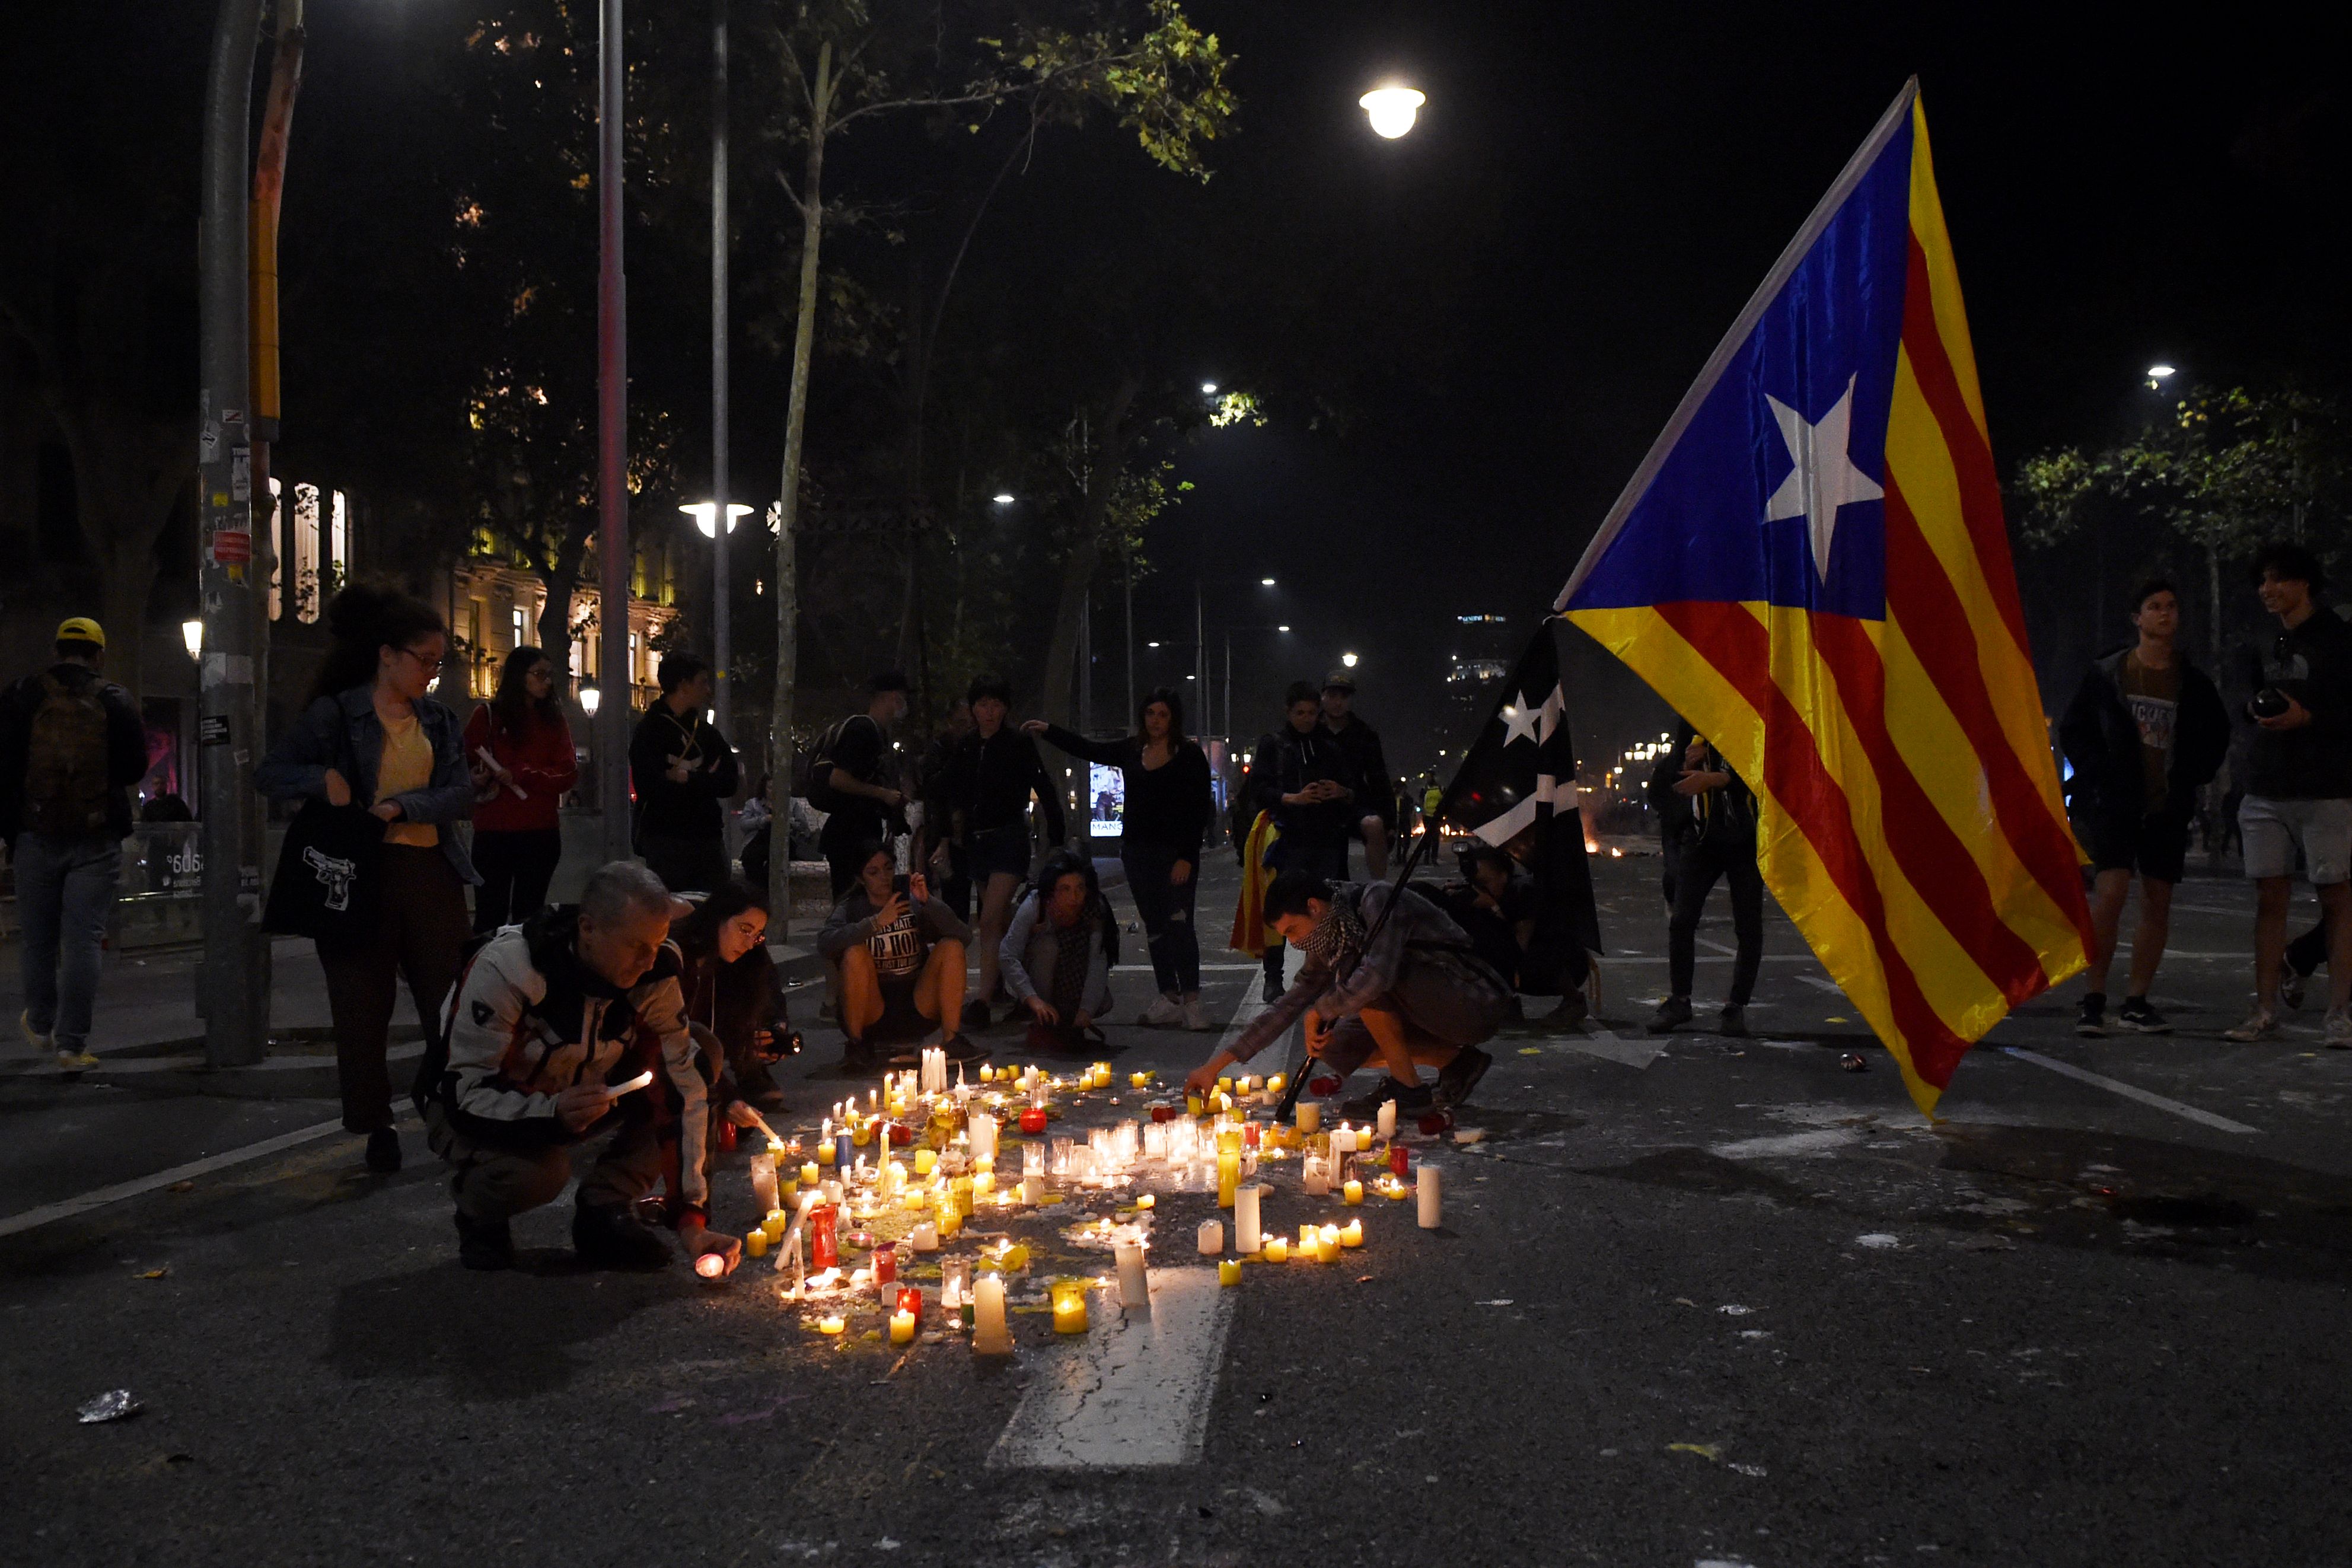  People hold a Catalan flag and light candles during a protest against the jailing of Catalan separatists in Mallorca Street near the Spanish Government Delegation on October 15, 2019 in Barcelona